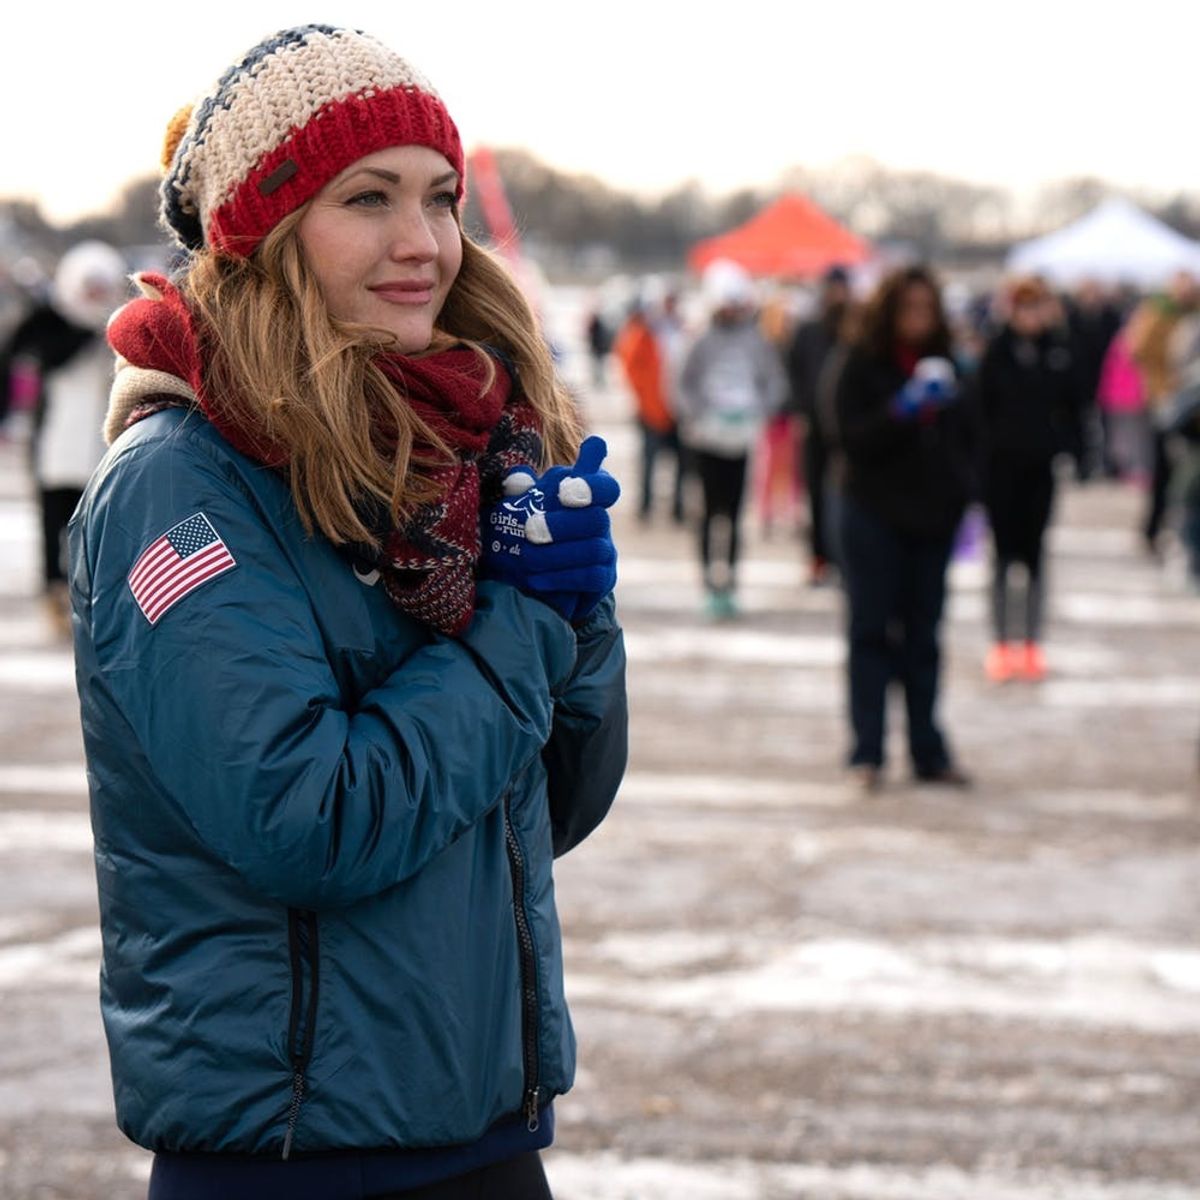 Paralympian and ‘DWTS’ Finalist Amy Purdy Shares Her Secret to Keeping Inspired